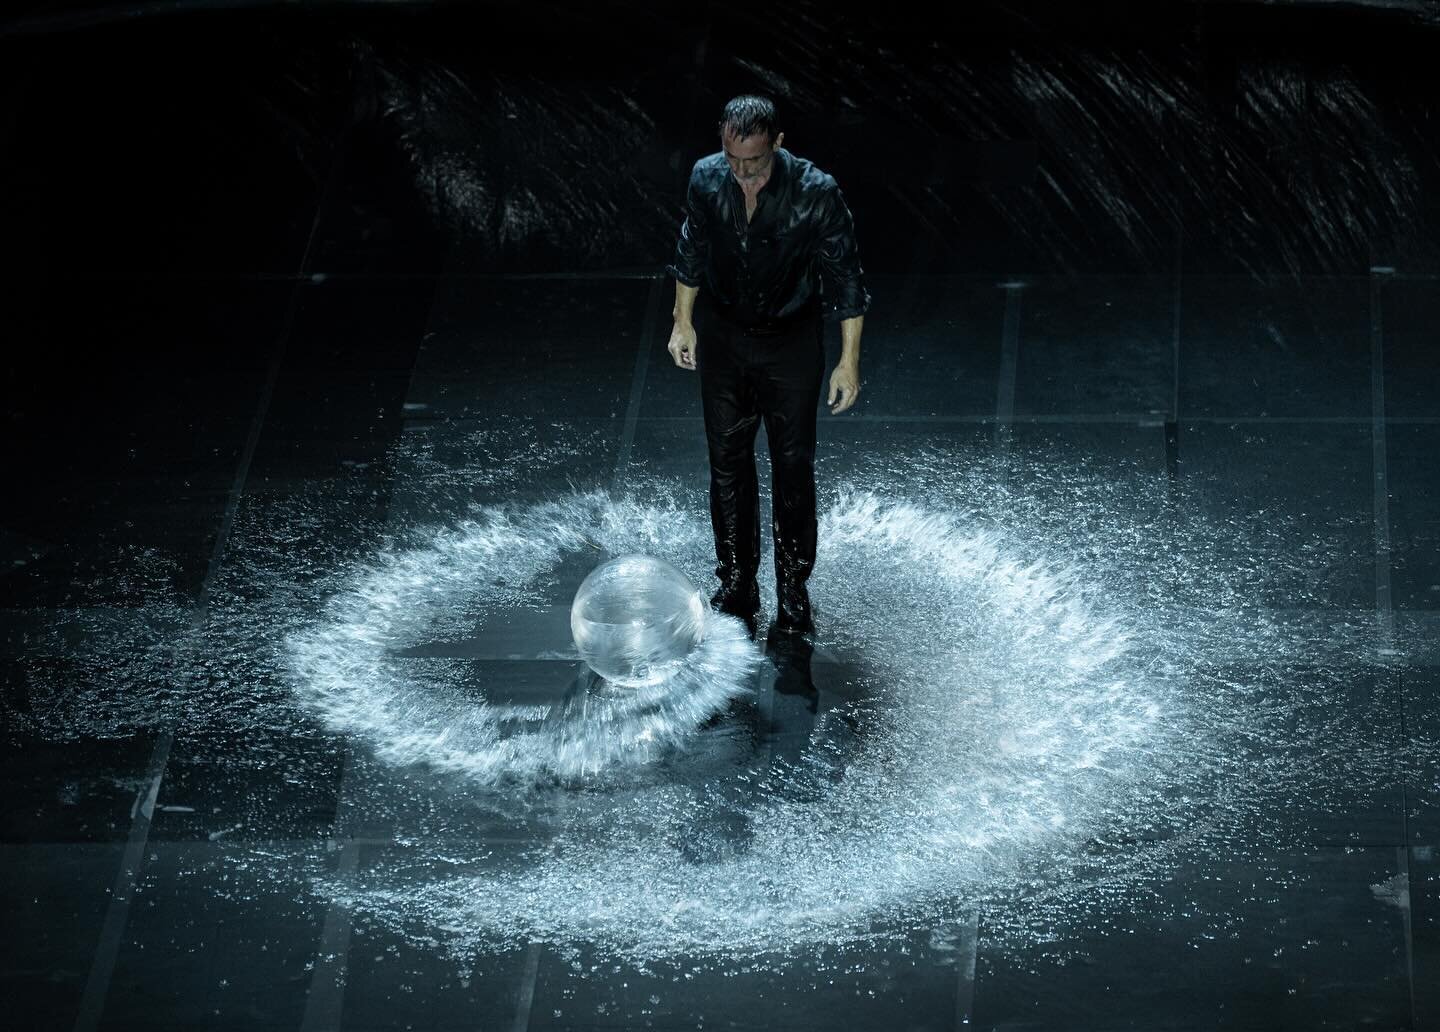 DIMITRIS PAPAIOANNOU &ndash; INK

Greek director, choreographer, and visual artist Dimitris Papaioannou returns to Sadler&rsquo;s Wells Theatre with the UK premiere of INK from Wednesday 28 February to Saturday 2 March. Following sold-out and Olivier